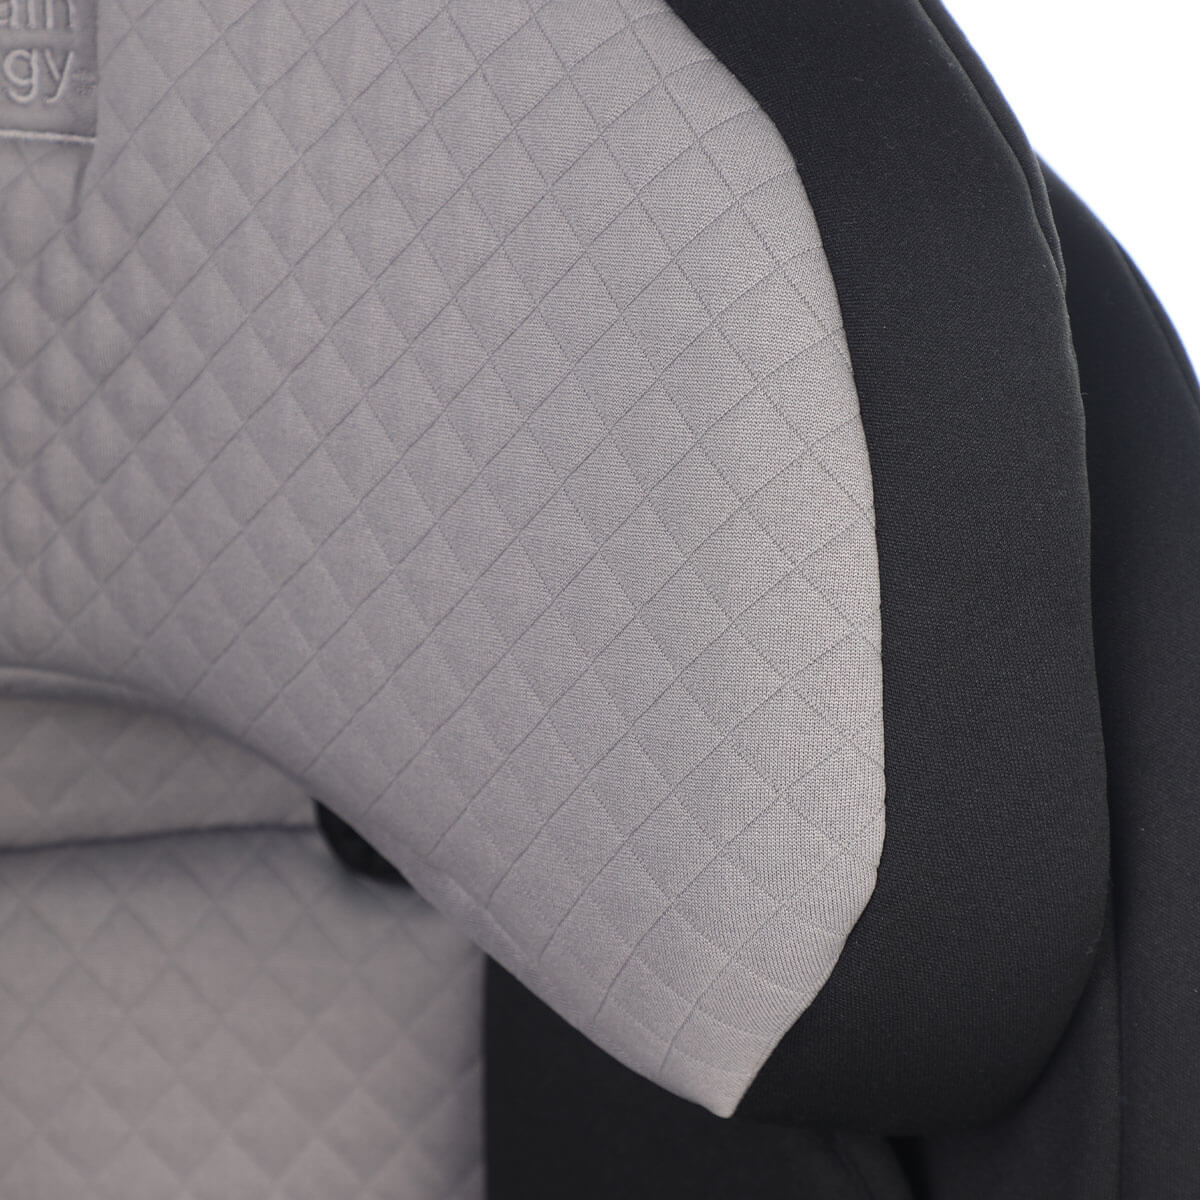 Mountain Buggy haven i-size booster car seat quilted fabric closeup